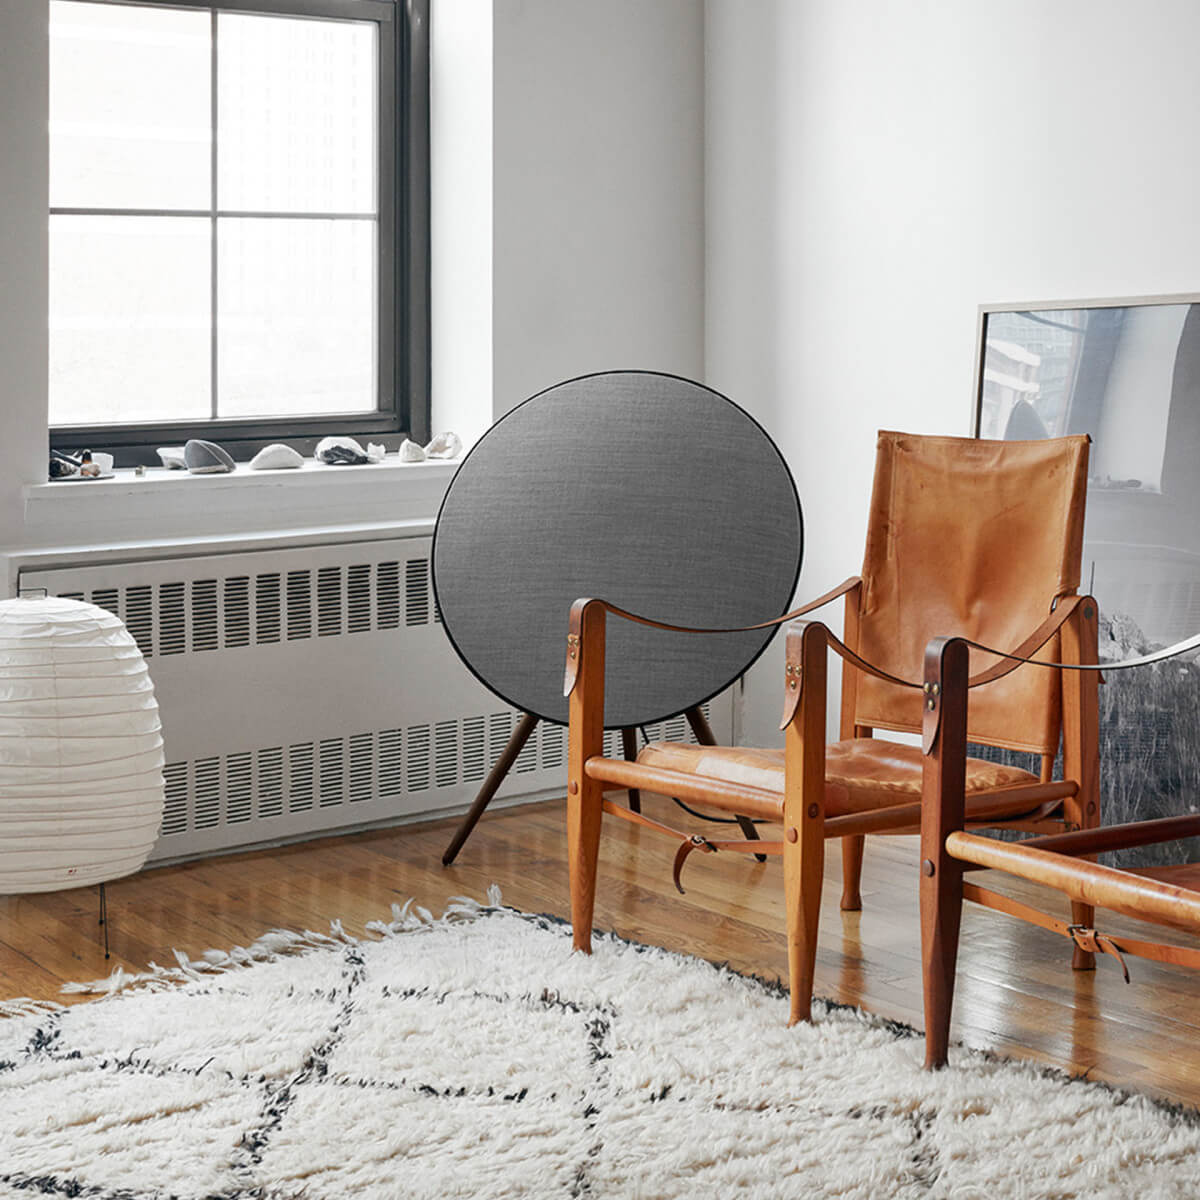 bang & olufsen beoplay a9